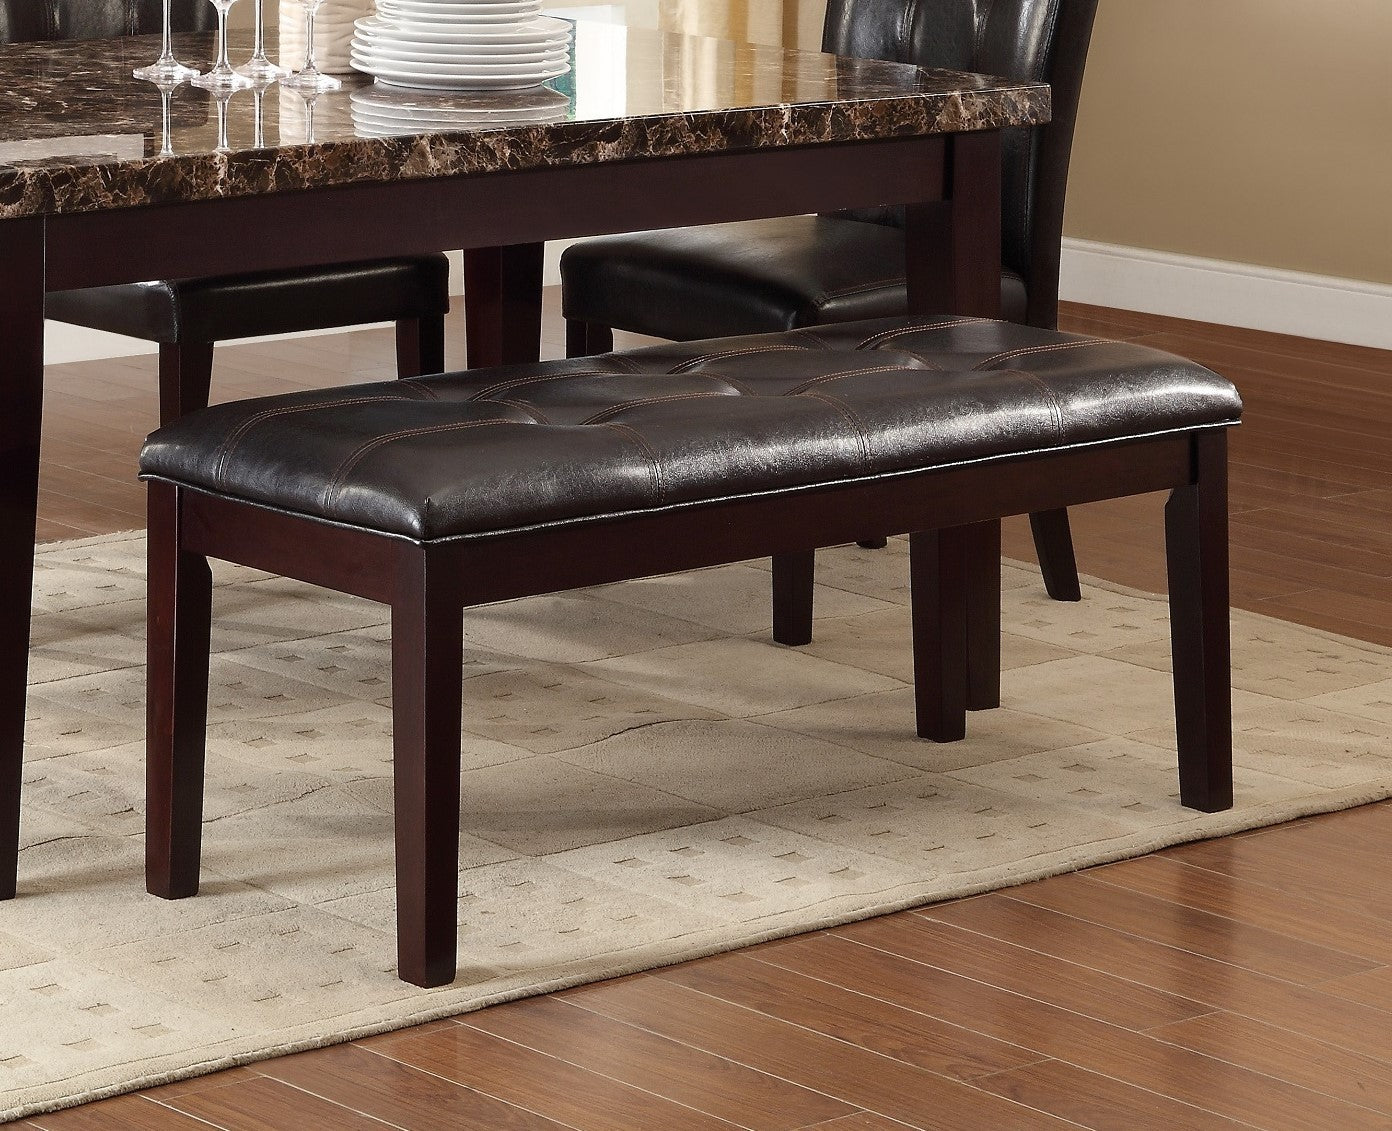 Espresso Finish 1pc Dining Bench Faux Leather Upholstered Button-Tufted Top Seat Transitional Dining Room Furniture